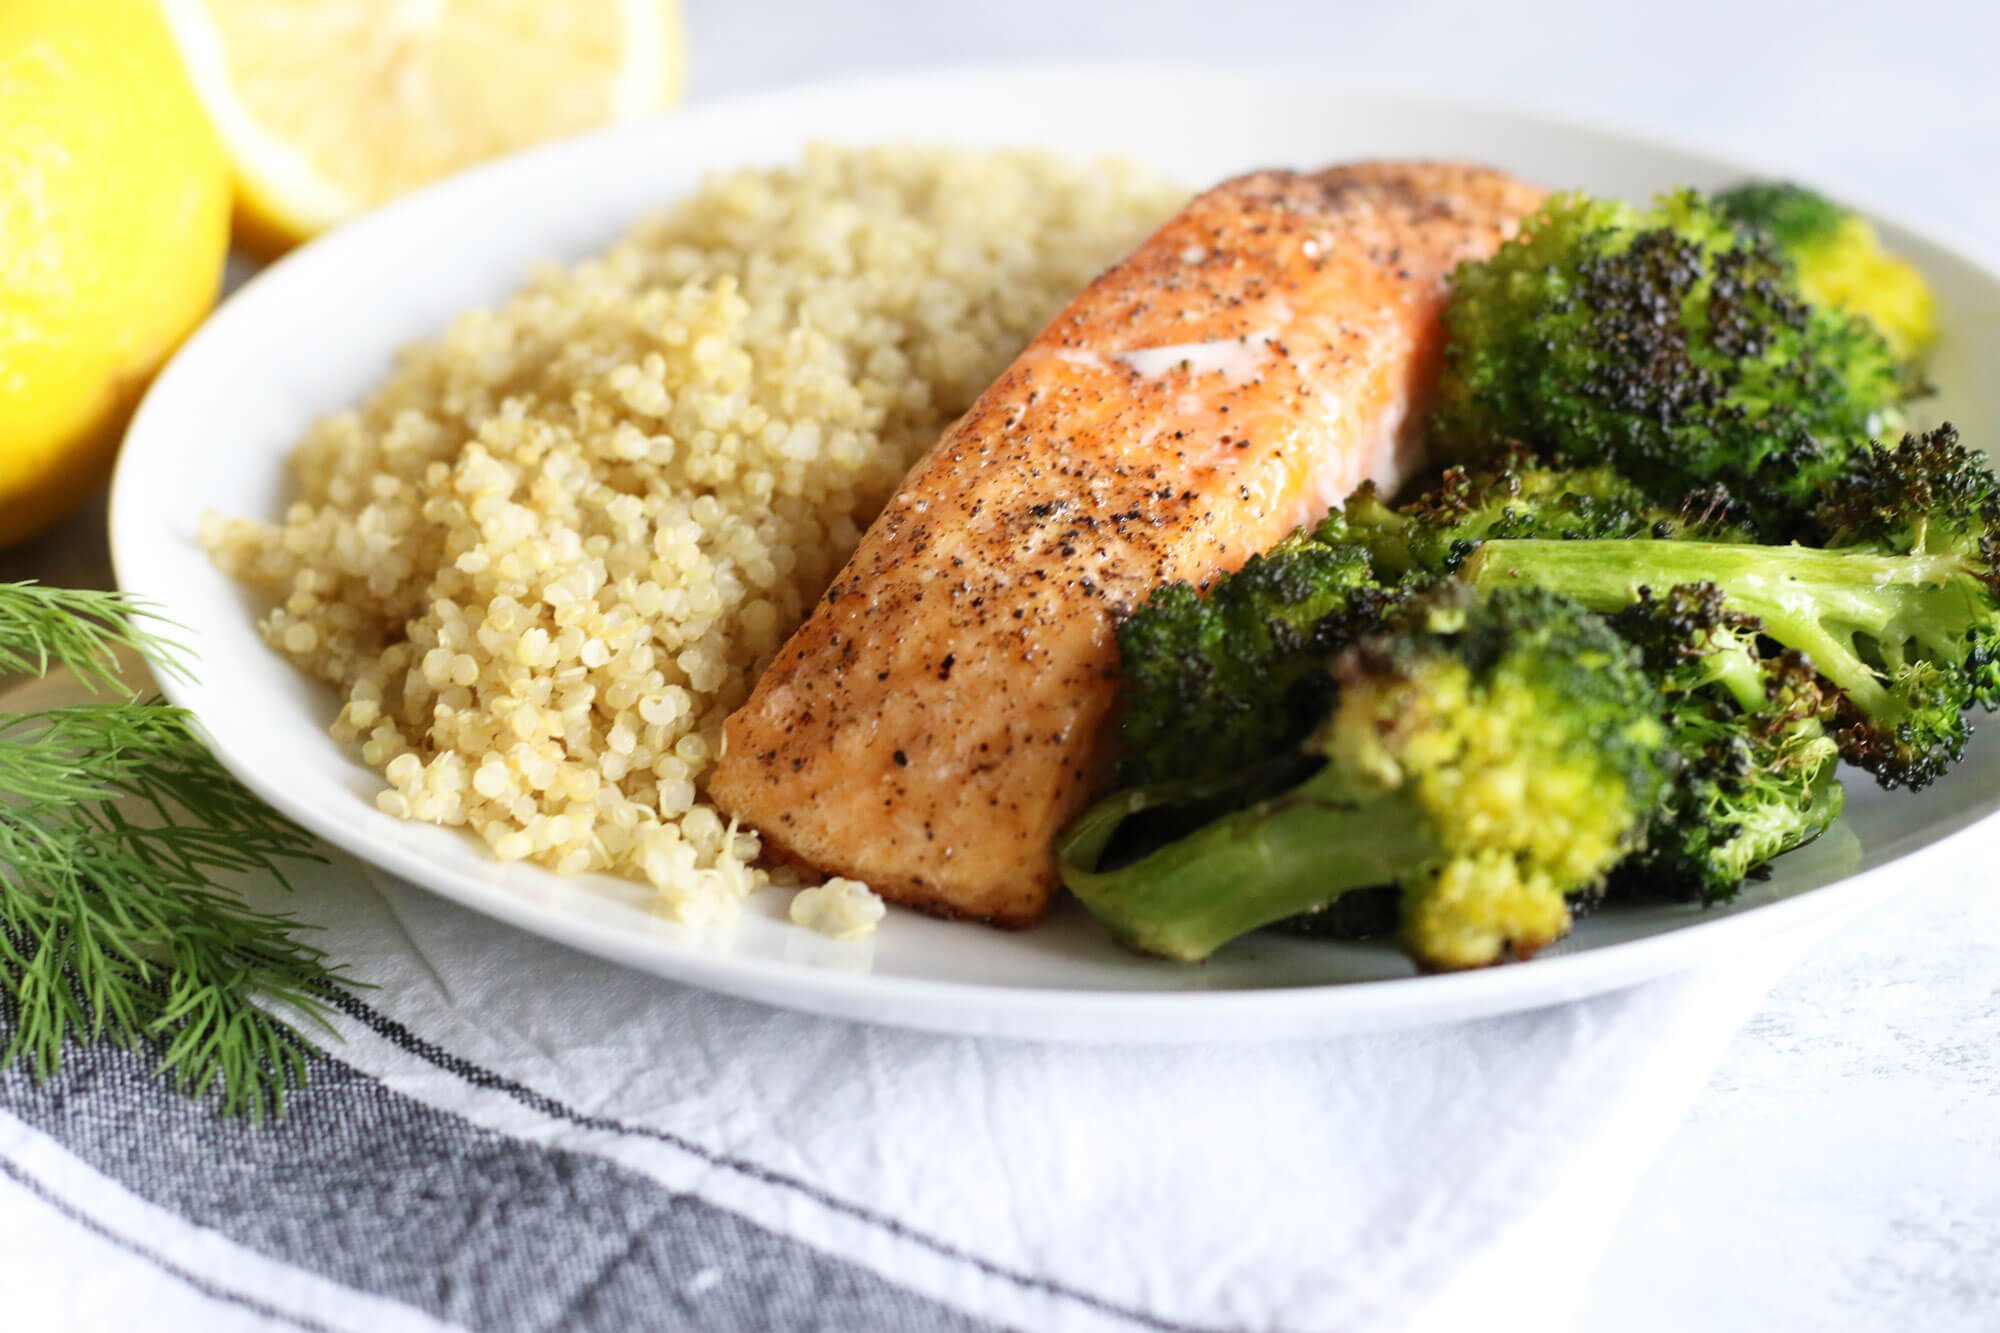 20 Simple Meals to Help Your Clients Hit Their Macros: Baked Salmon with Broccoli & Quinoa